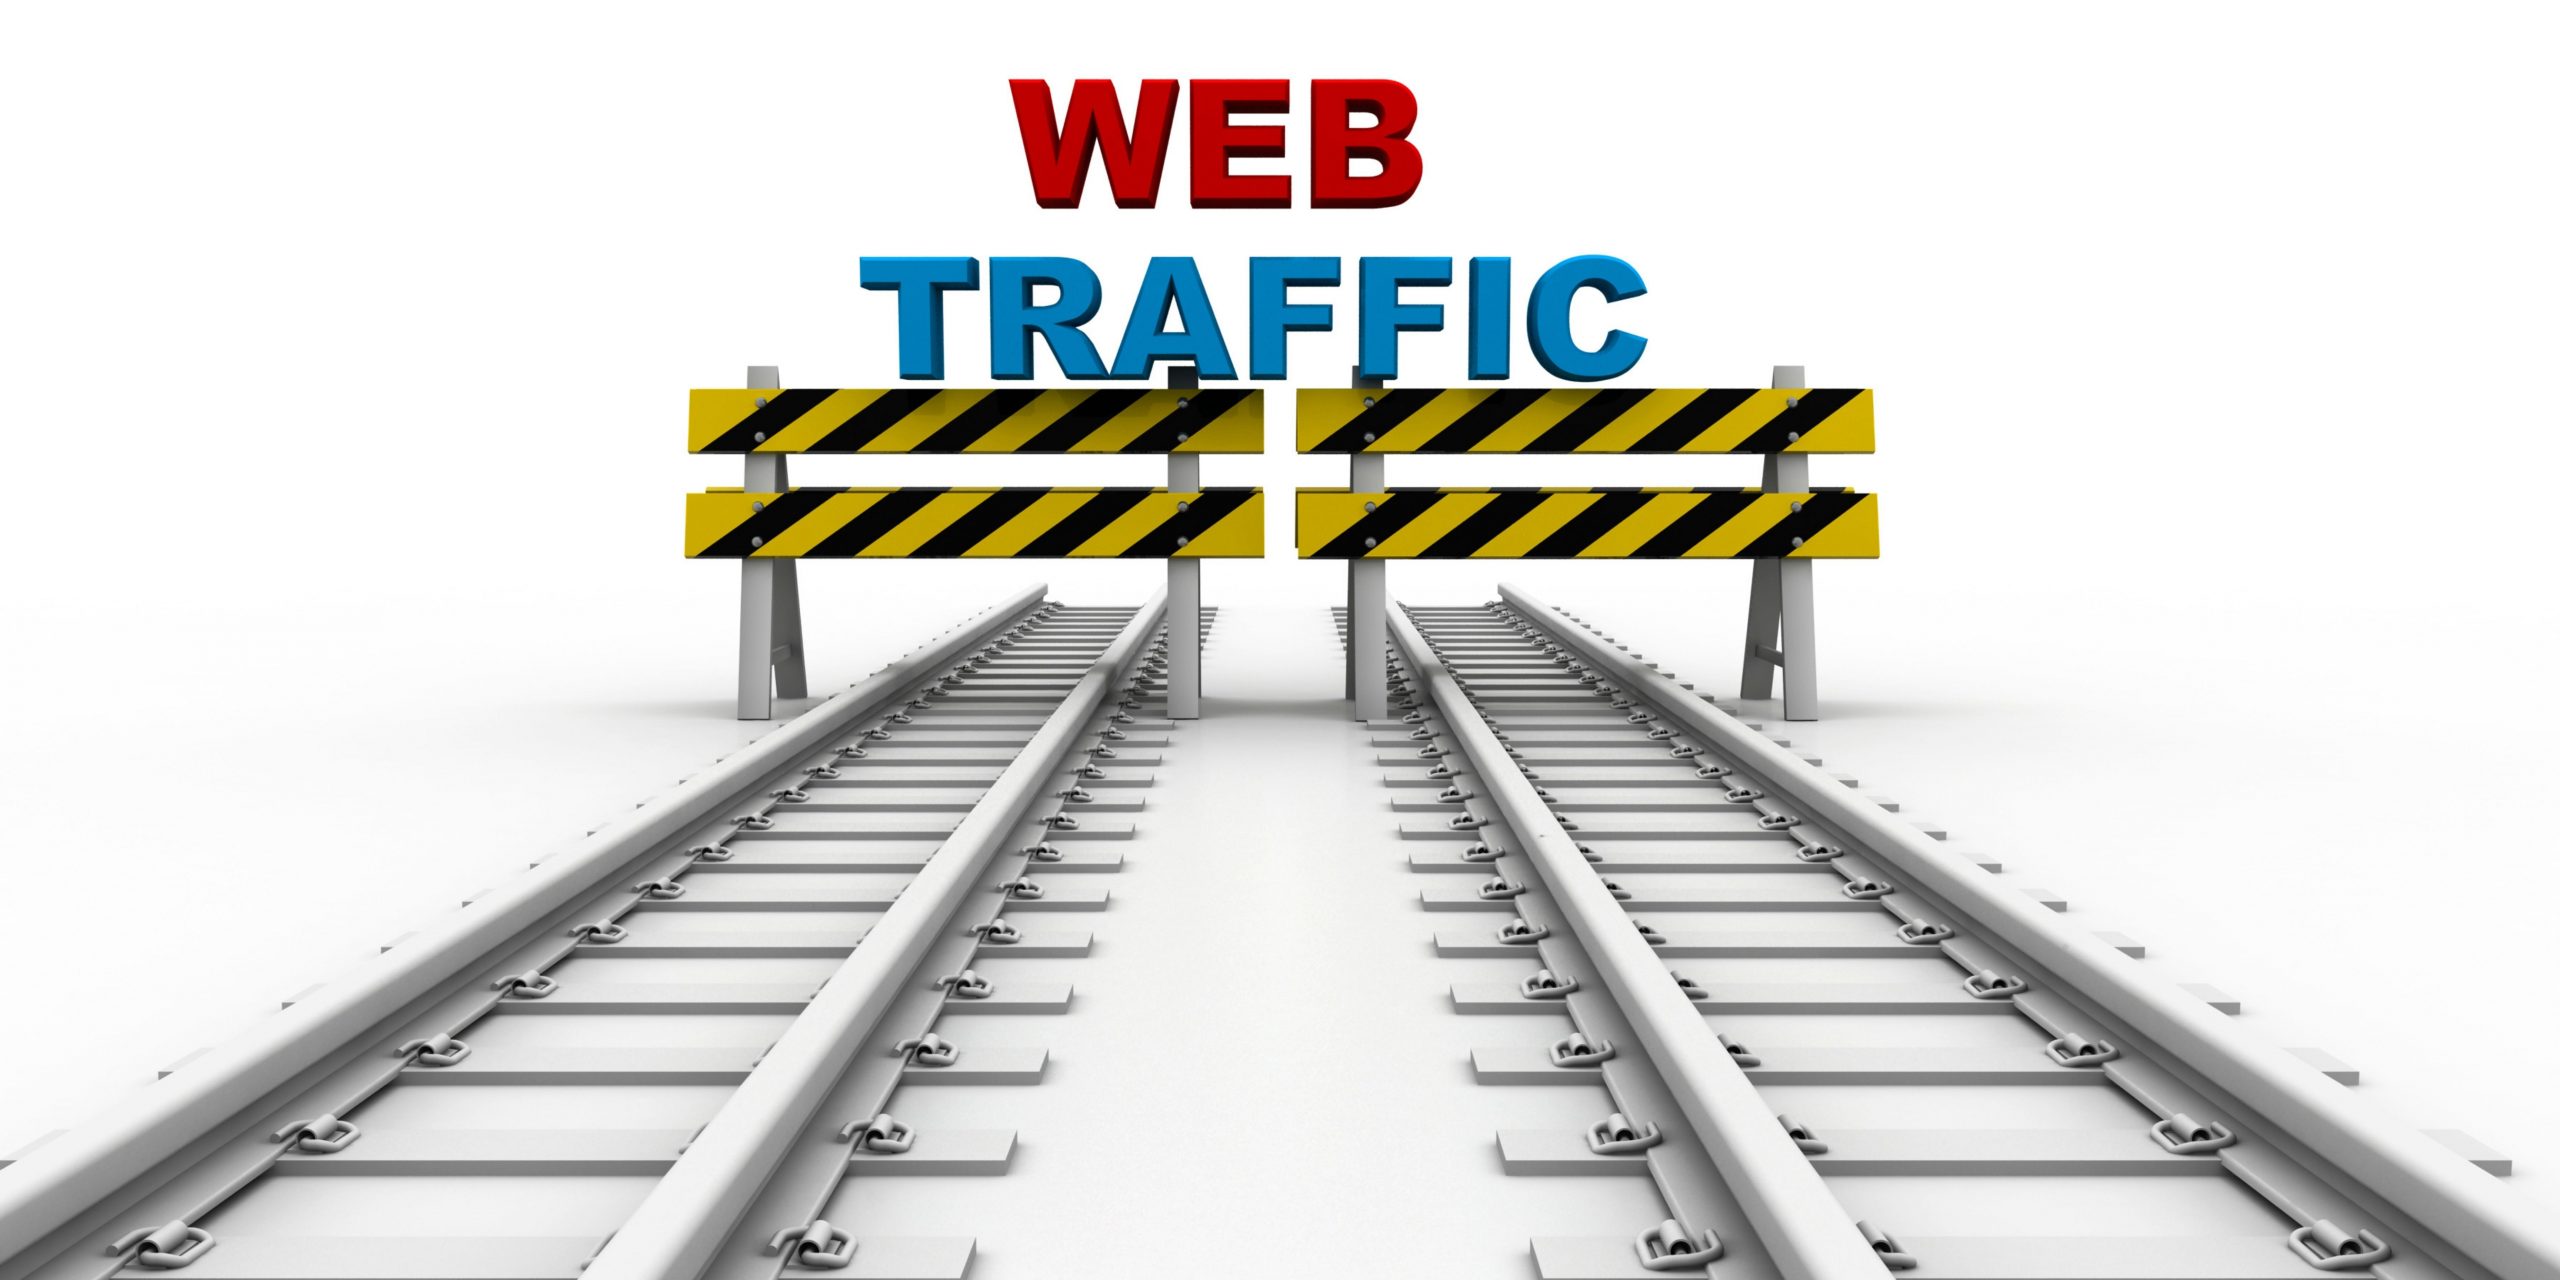 Free Listings Make a submission to get free traffic all over the world